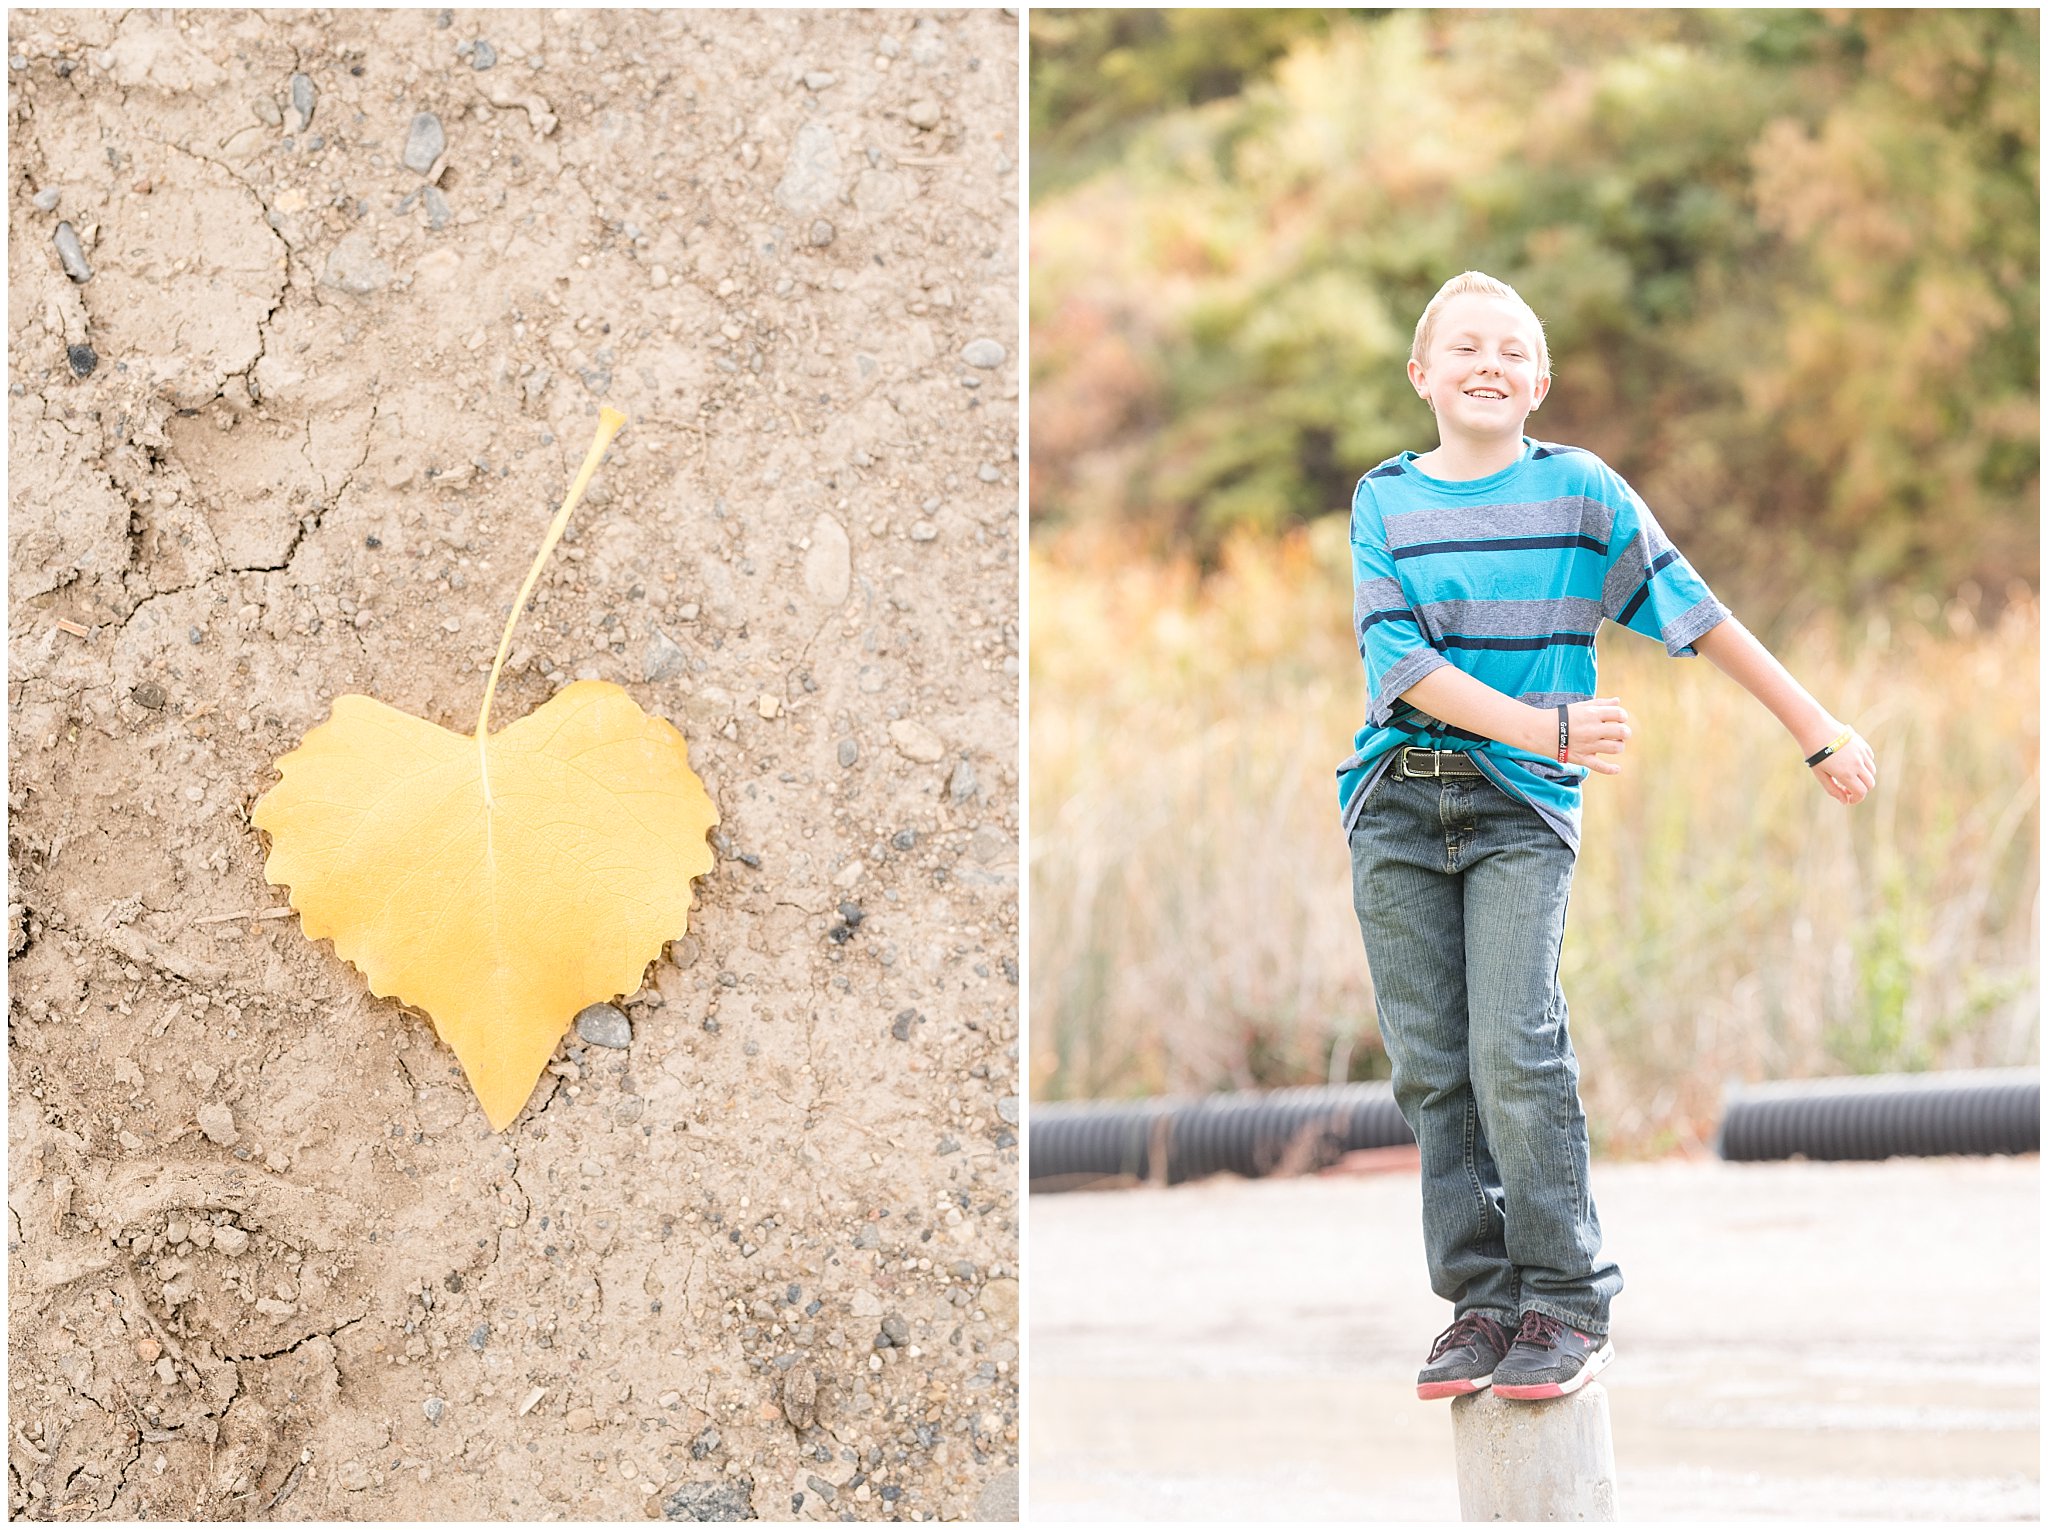 Heart leaf and kid flossing on a post | Tremonton Family Pictures and Make a Wish Event | Jessie and Dallin Photography